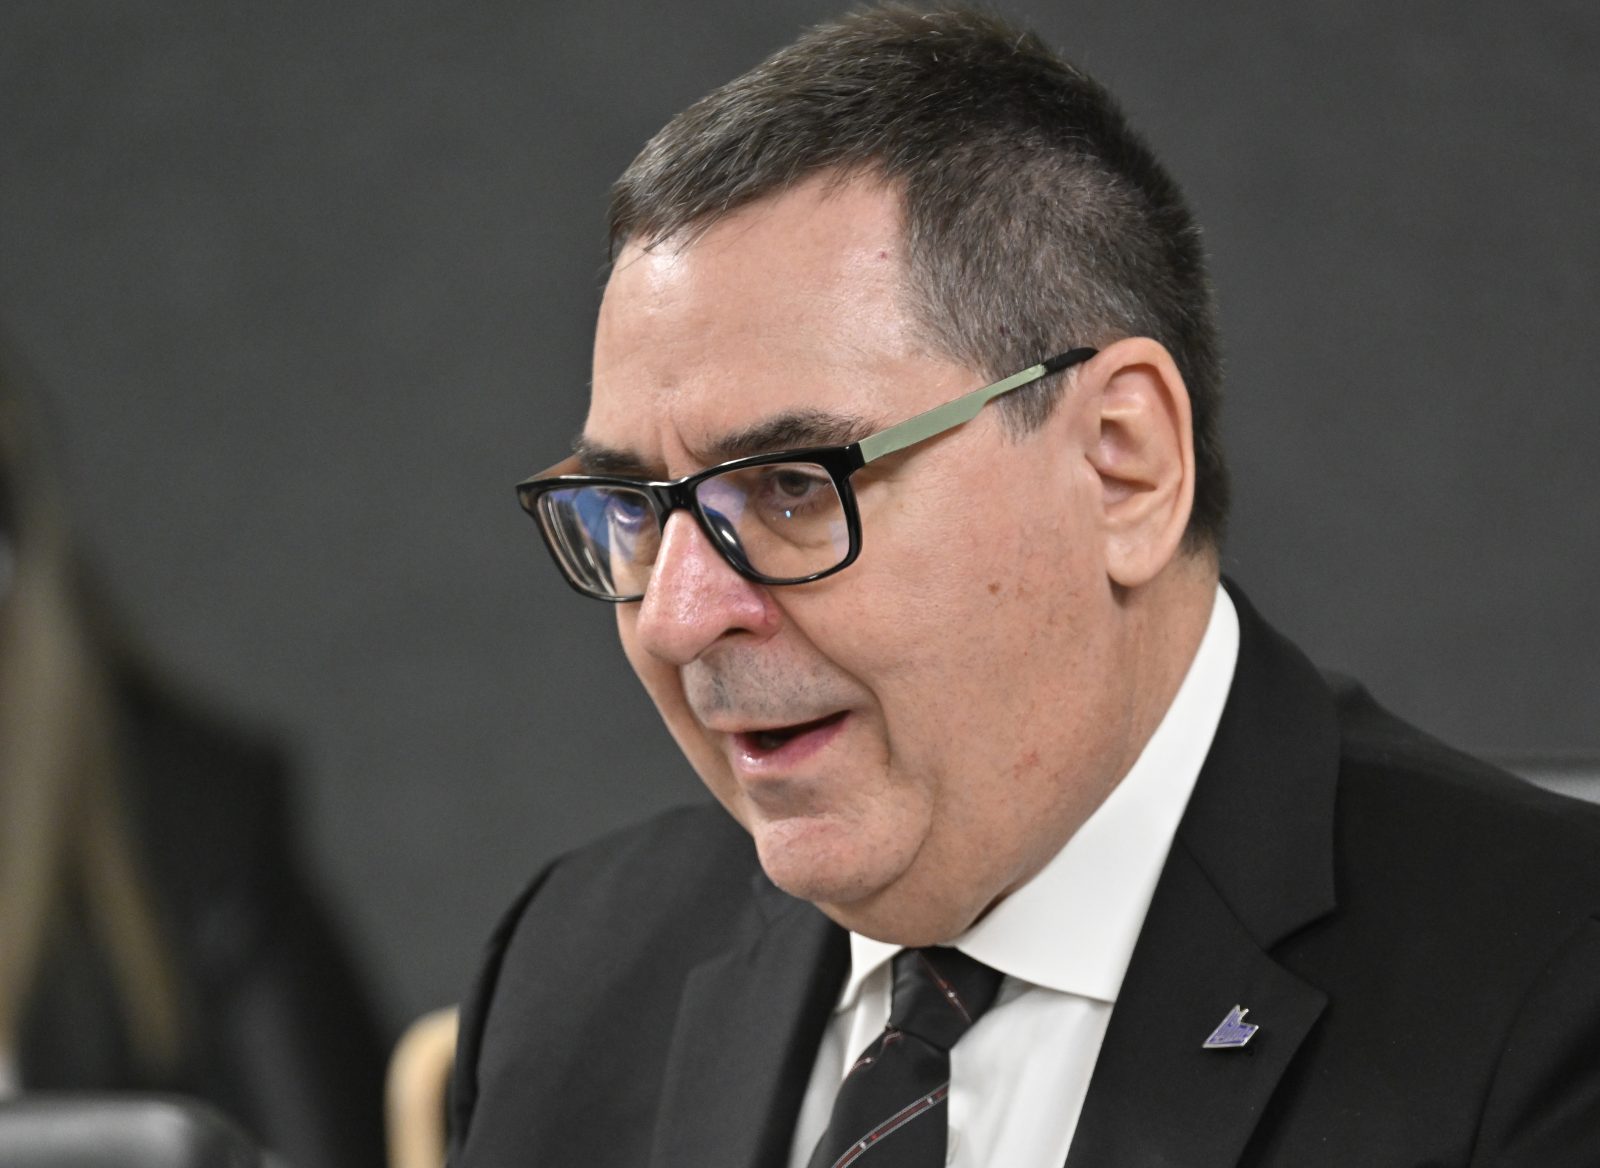 QMJHL commissioner resigns after 37 years